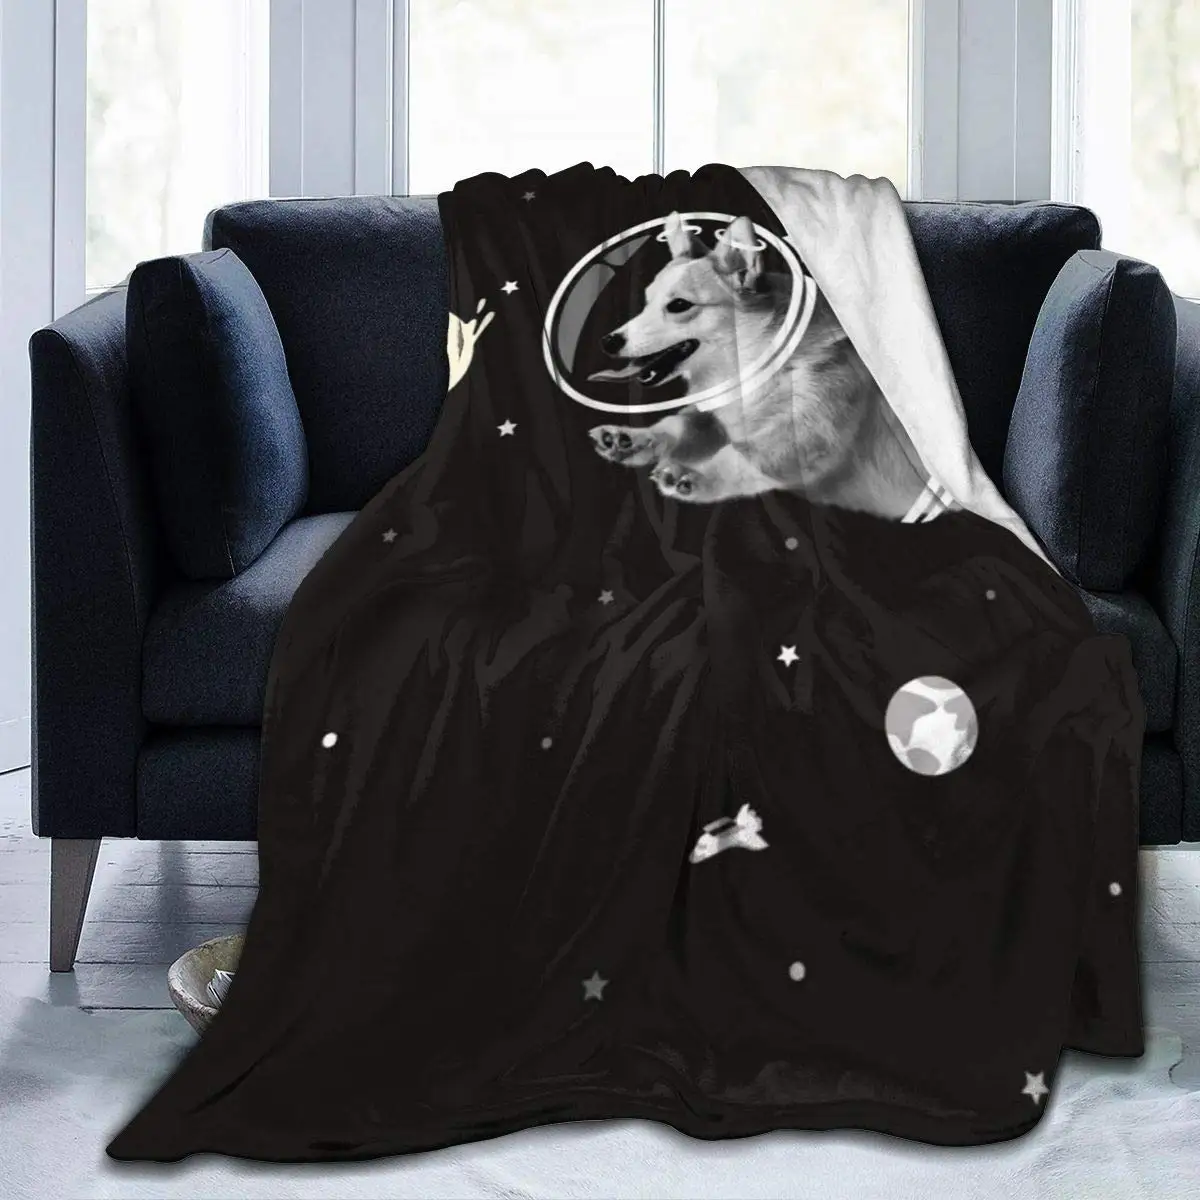 

Adults Men Women Super Soft Blankets Galaxy Space Ice Cream Astronaut Dog Black Super Warm Throw Wrap Cover King Size Wearable